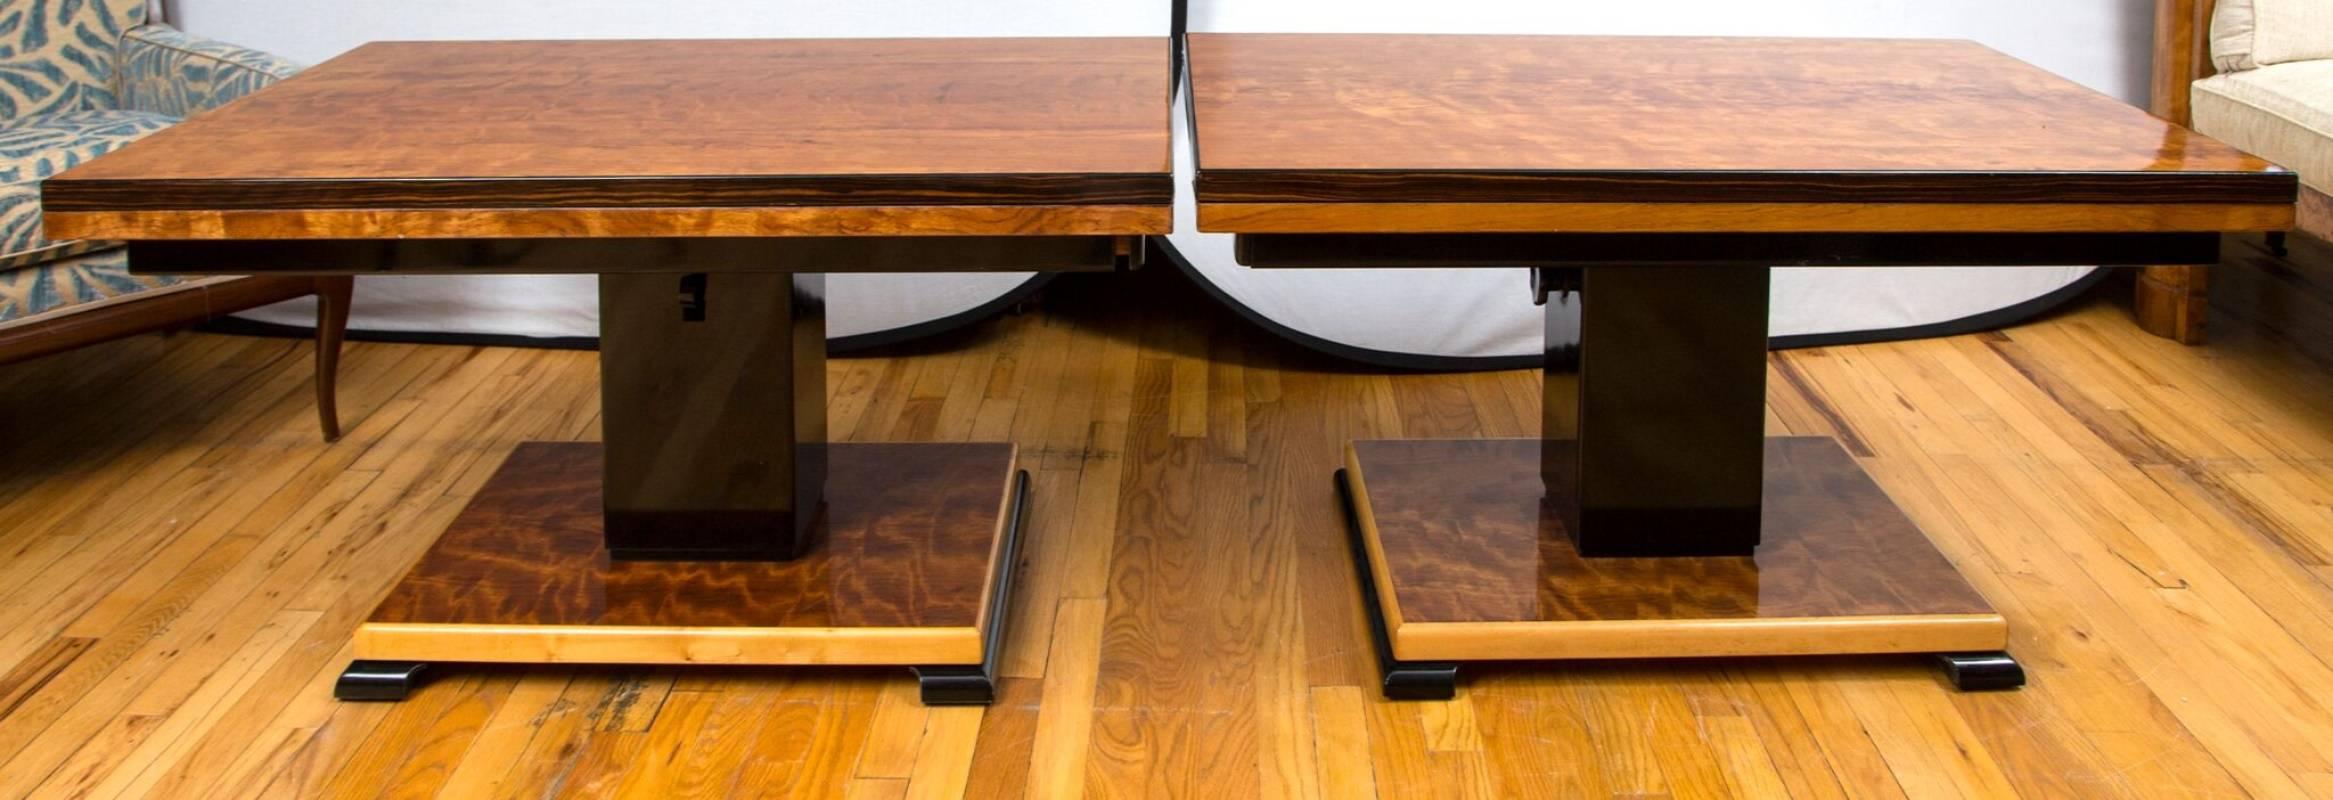 This adjustable table by Otto Wretling (1901-1986) was designed in 1936. The 